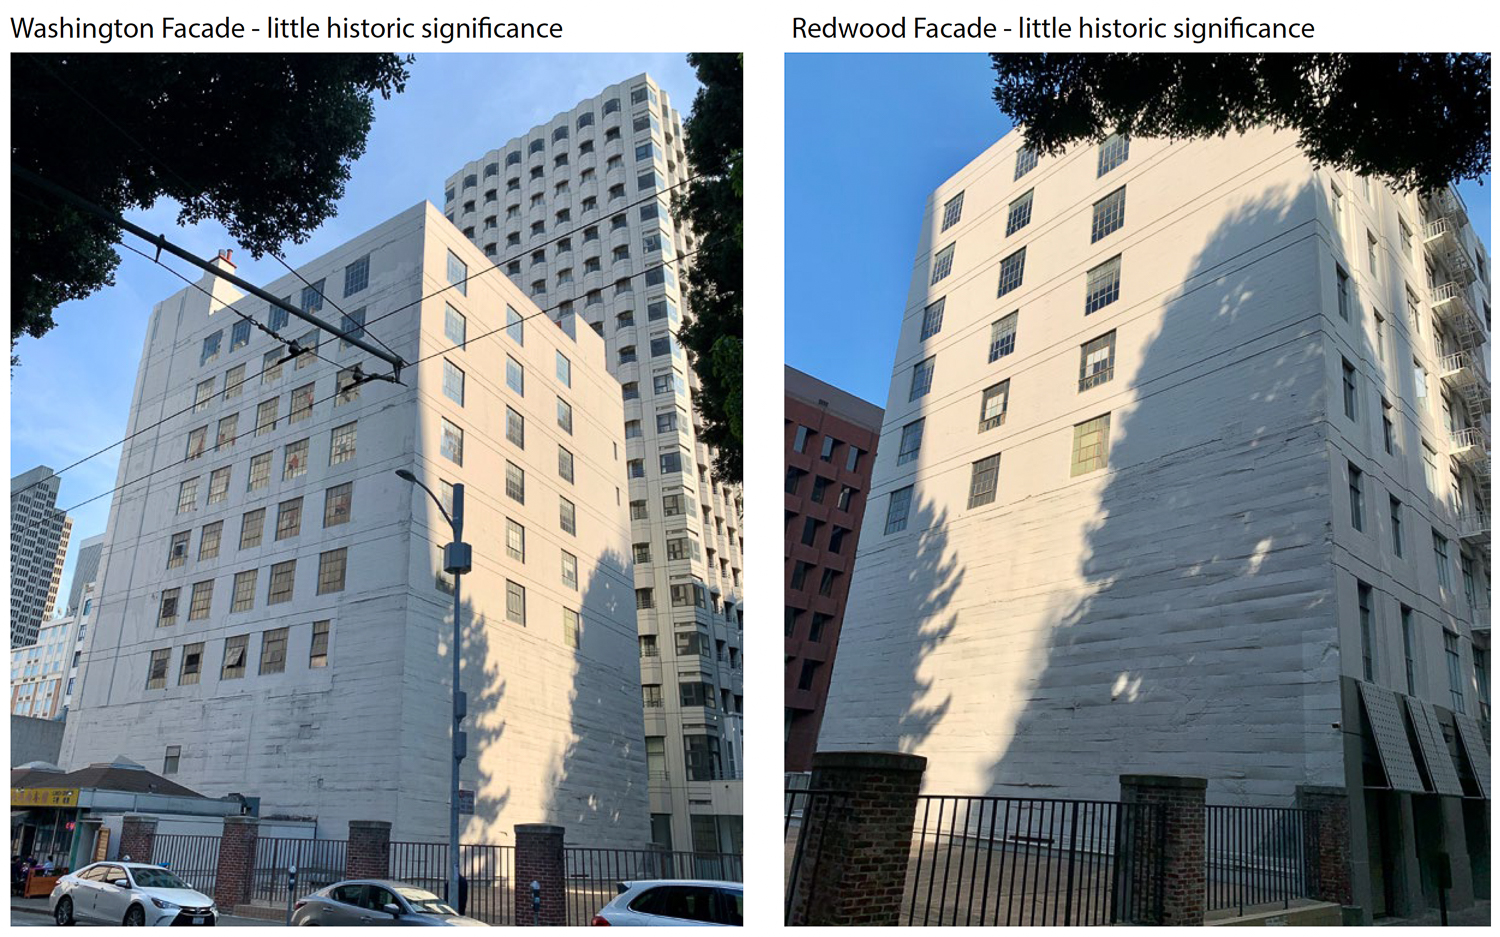 3 Transamerica existing condition, image via project plans published by the SF Planning Department